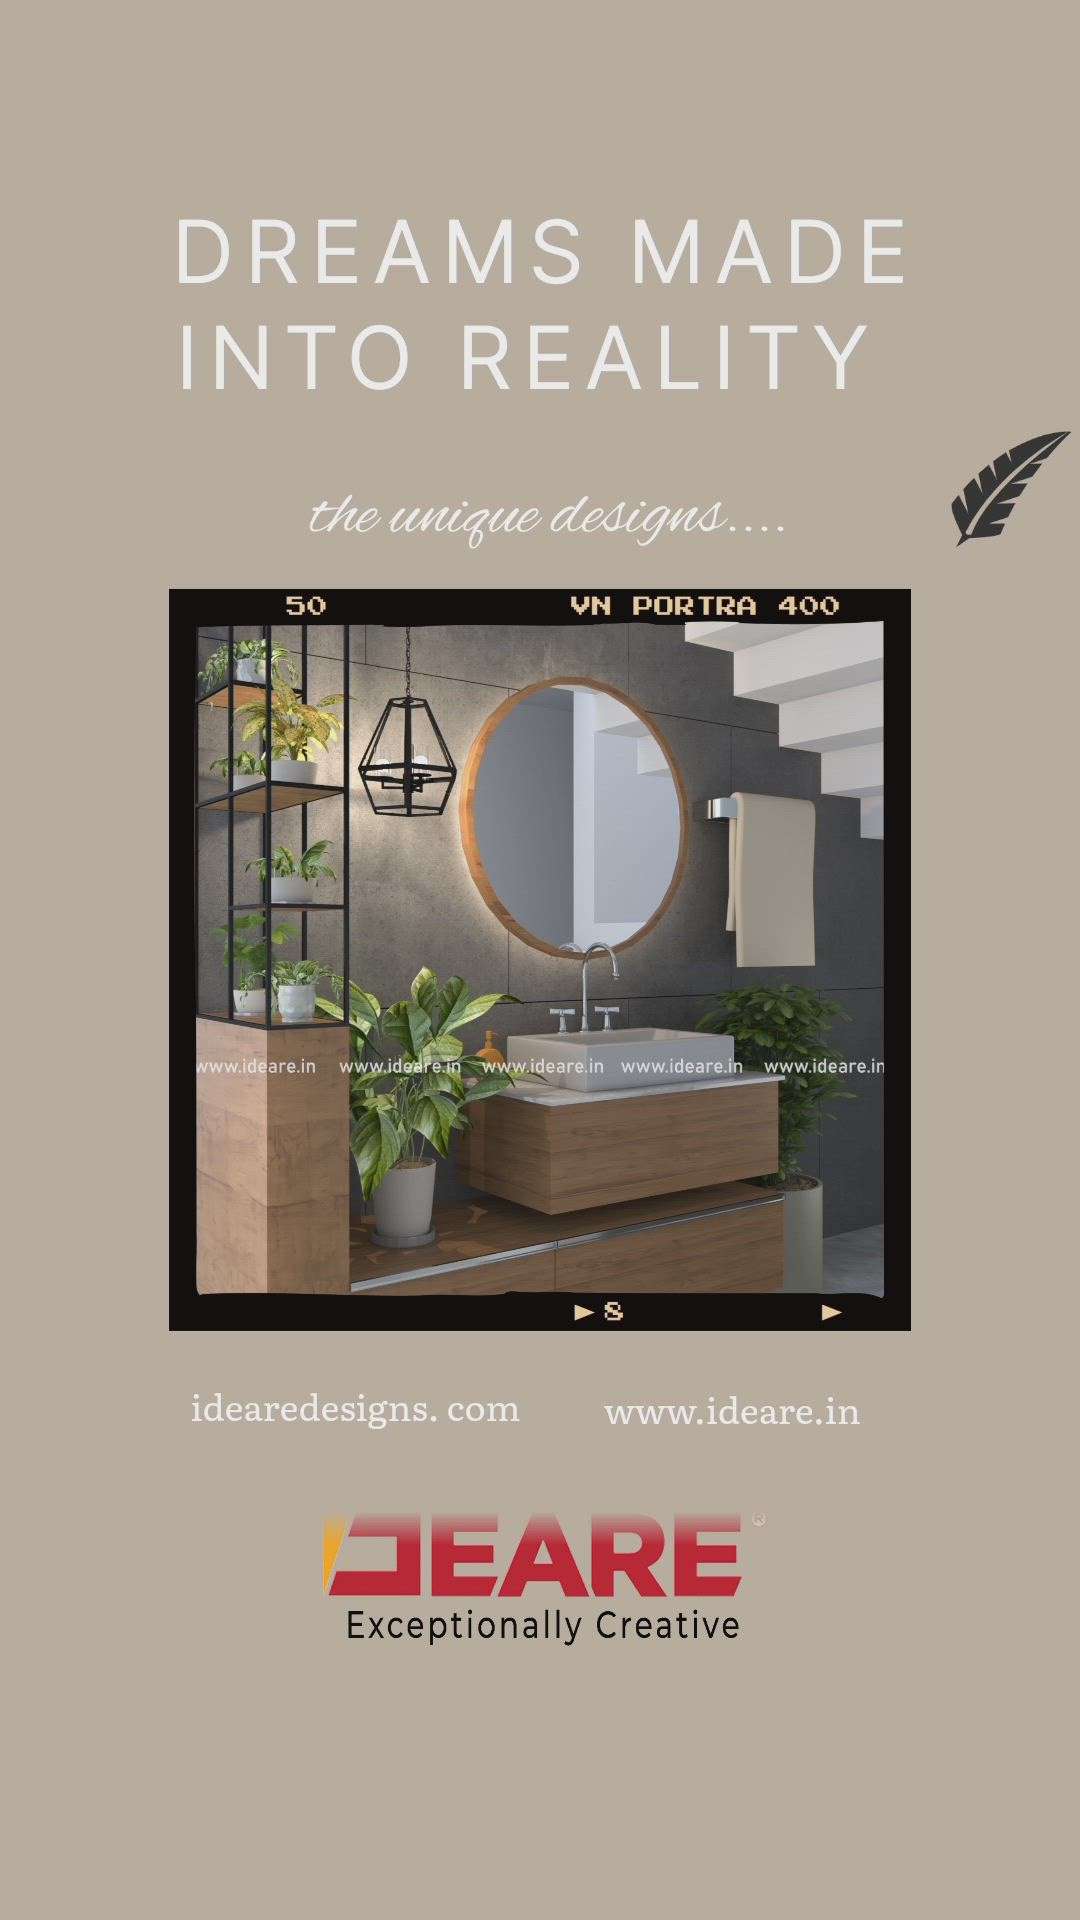 True comfort, both visual and physical, is essential for every room, it's not based on money, it's called great designing, and that's the IDEARE  group guarantee to our king clients.  #interiordesign   #HomeAutomation  #homedecoration  #Electrical  #Plumbing  #industrialdesign  #SlidingWindows  #modernkitchendesign  #ModernBedMaking  #MasterBedroom  #GlassHandRailStaircase